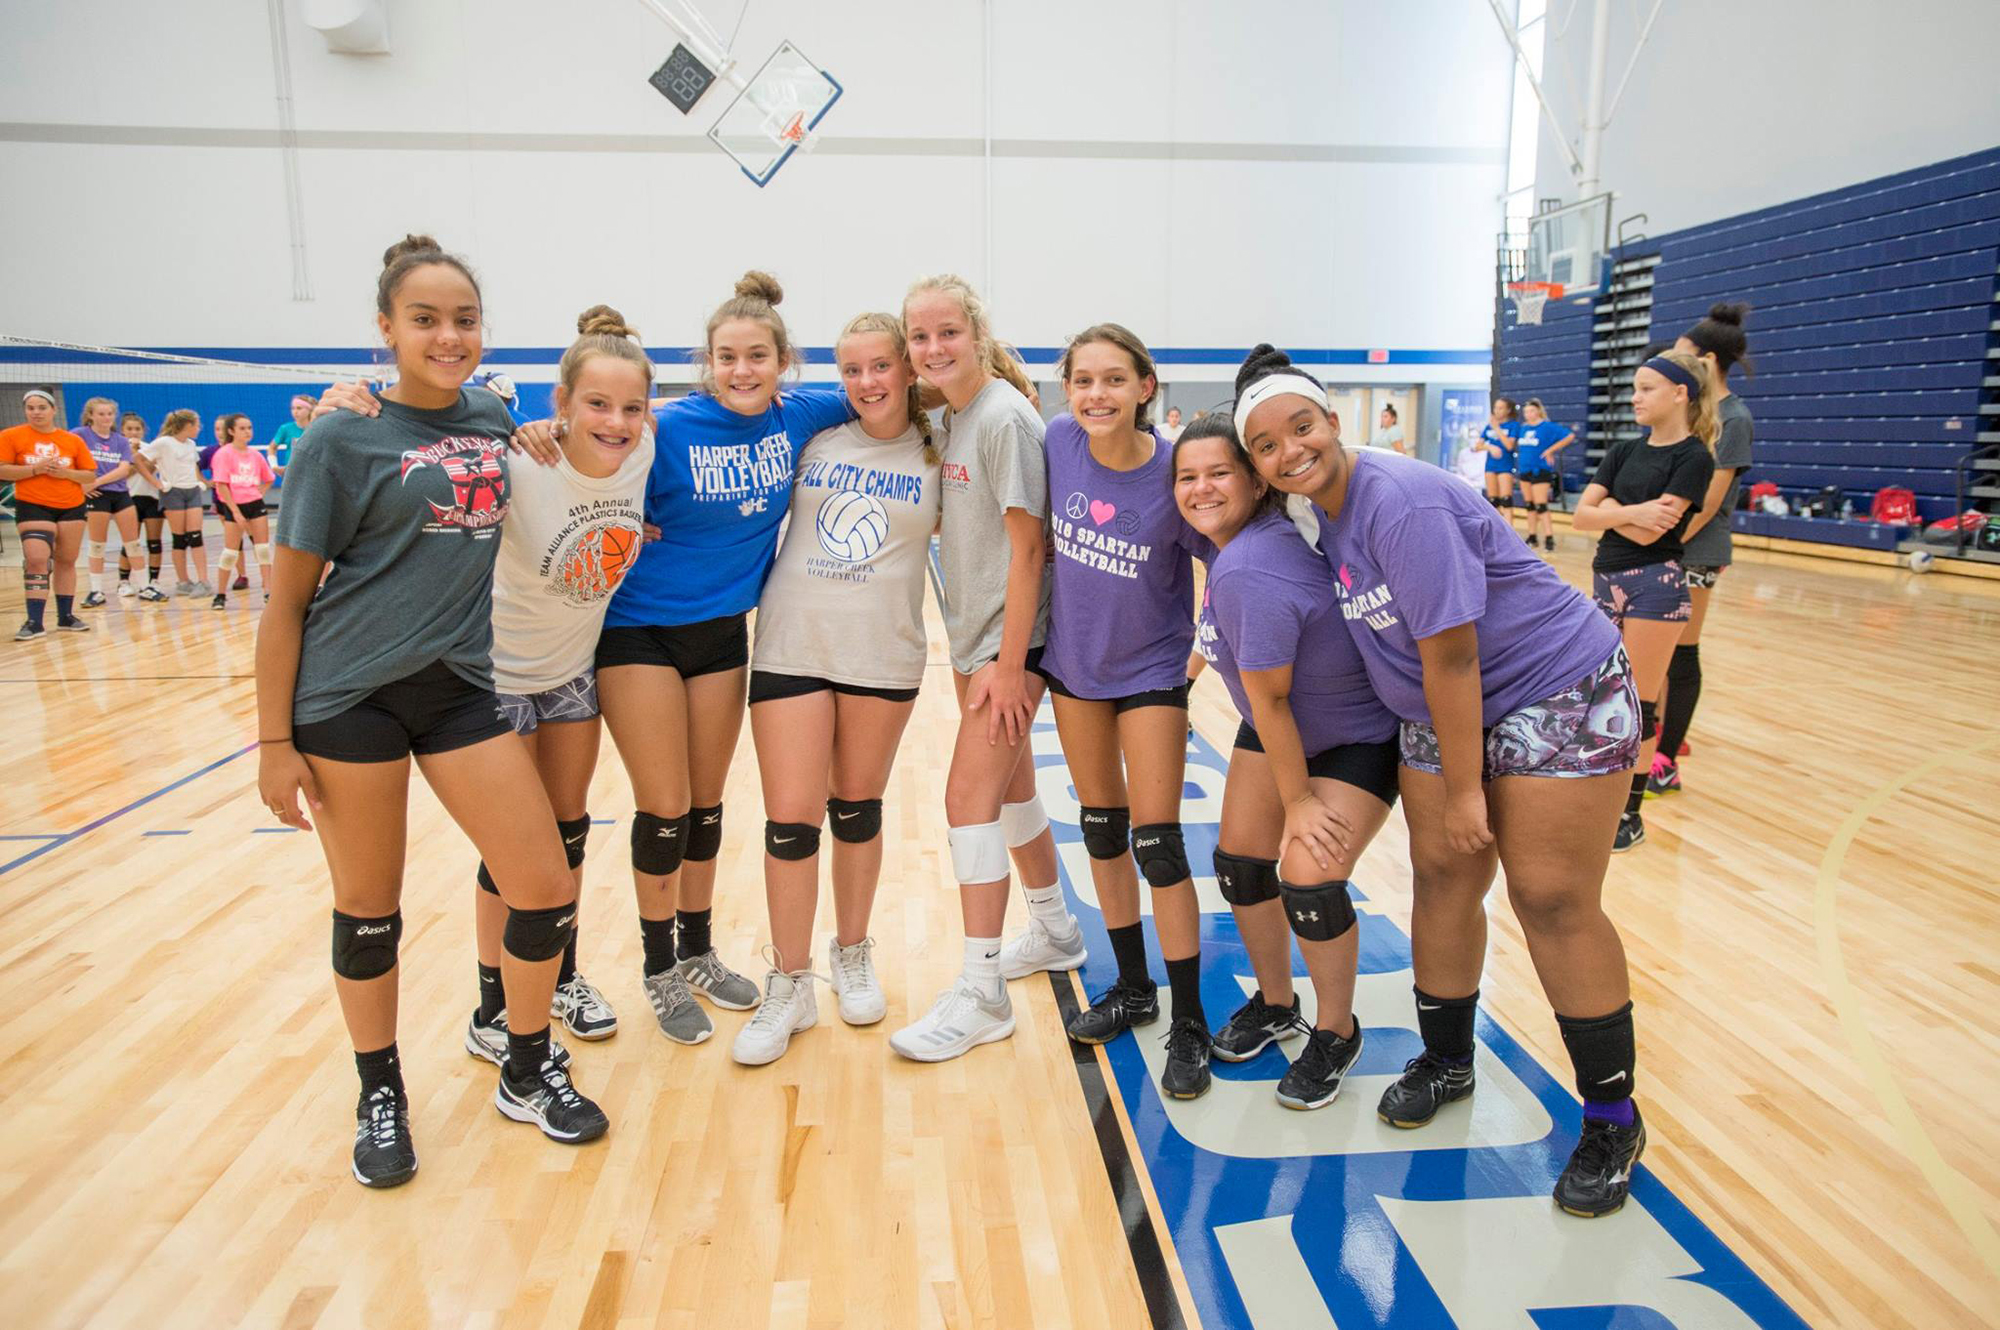 Youth volleyball camp participants pose for a group photo in the Miller Gym.